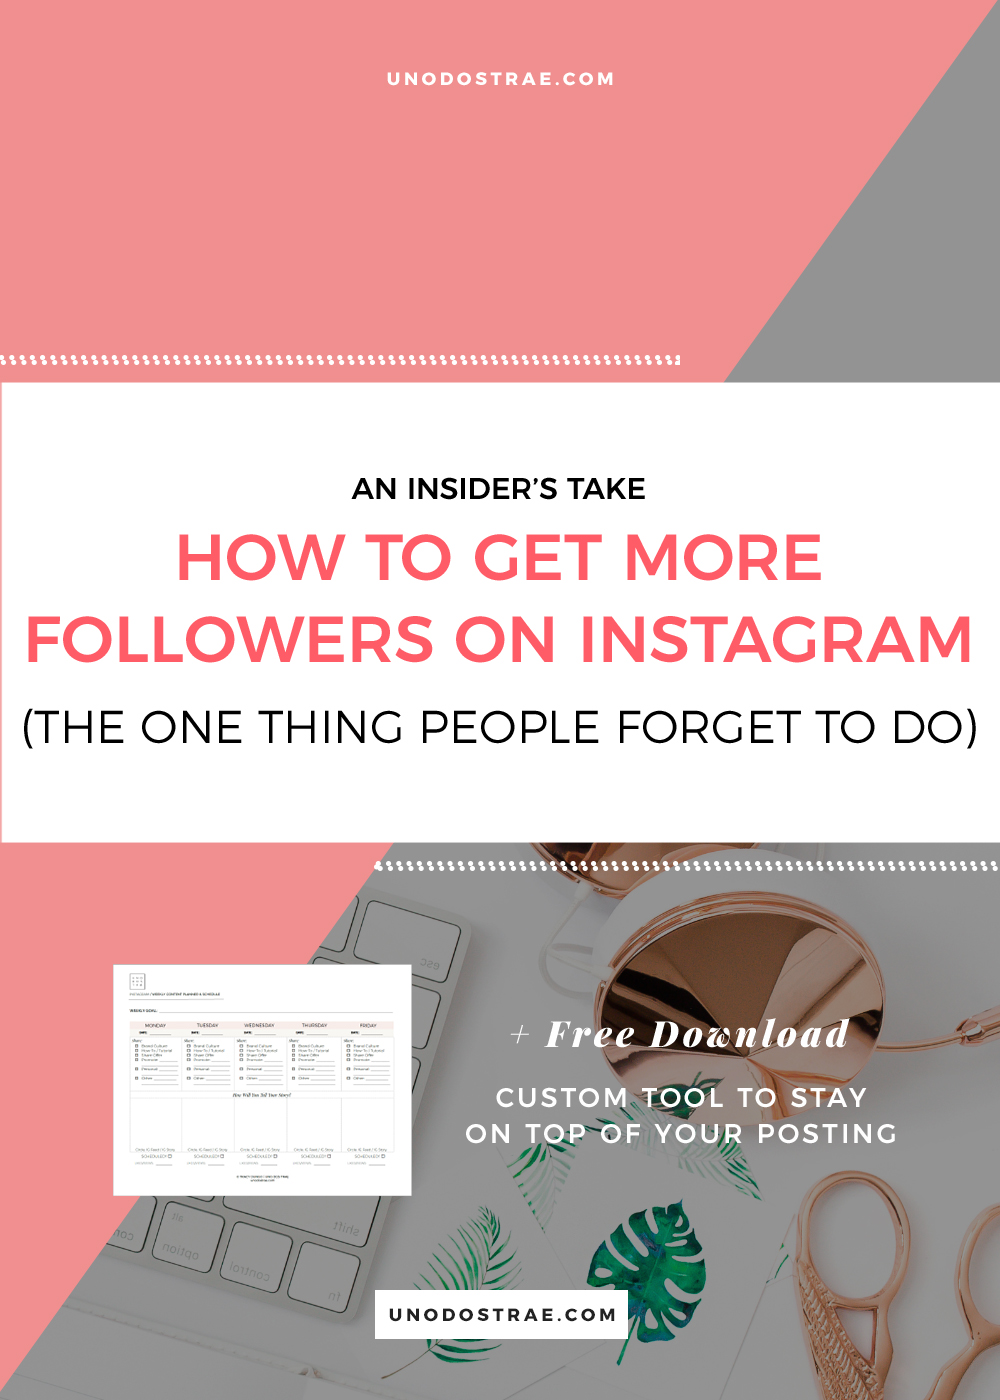 The best way to get instagram followers or get more followers on instagram | unodostrae.com